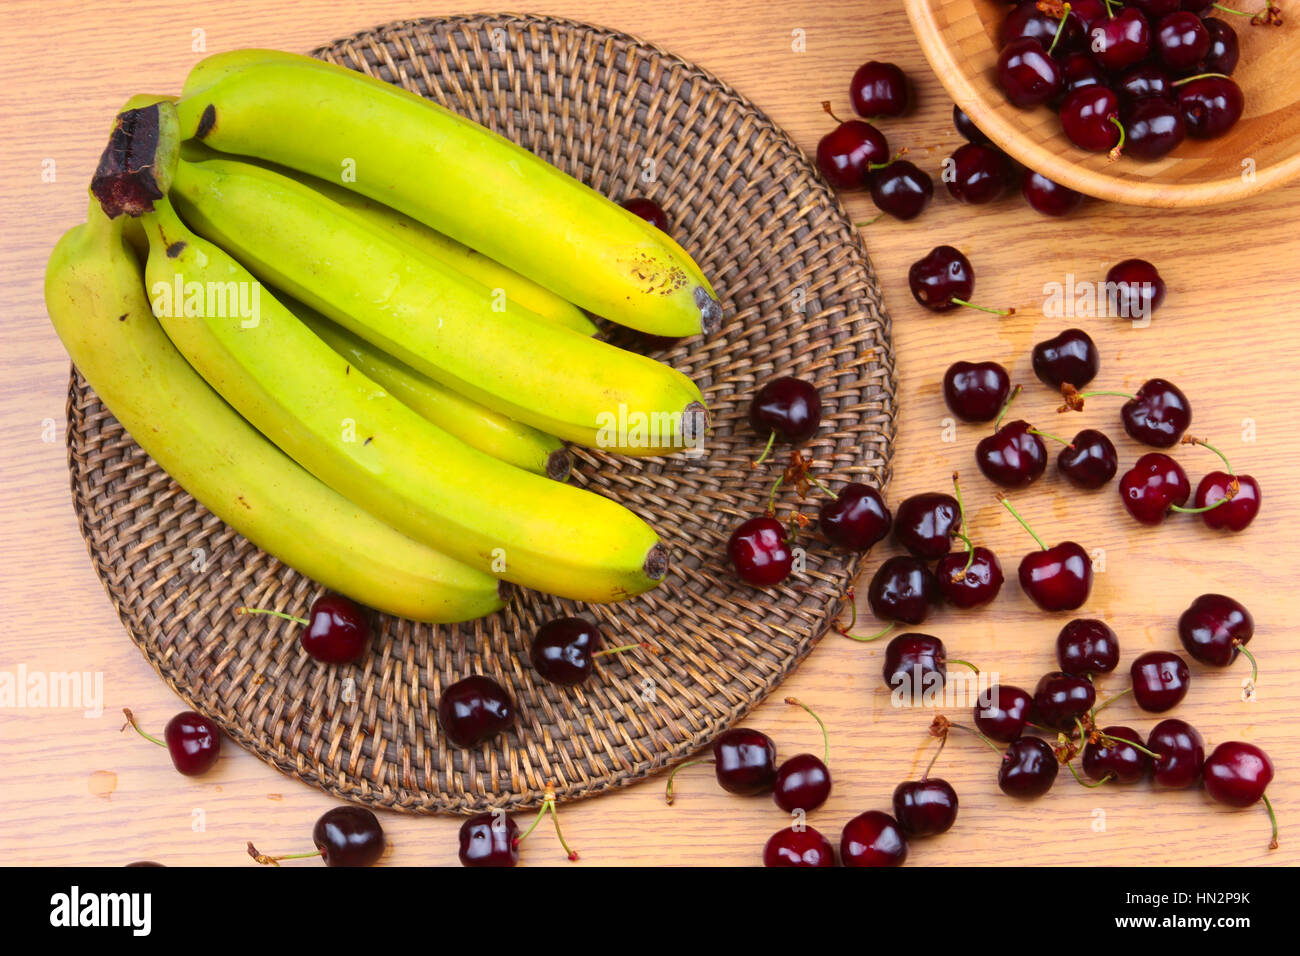 A Wooden Bowl of Mixed Fruits on a Wooden Background, Banana, Cherries, Peaches Stock Photo